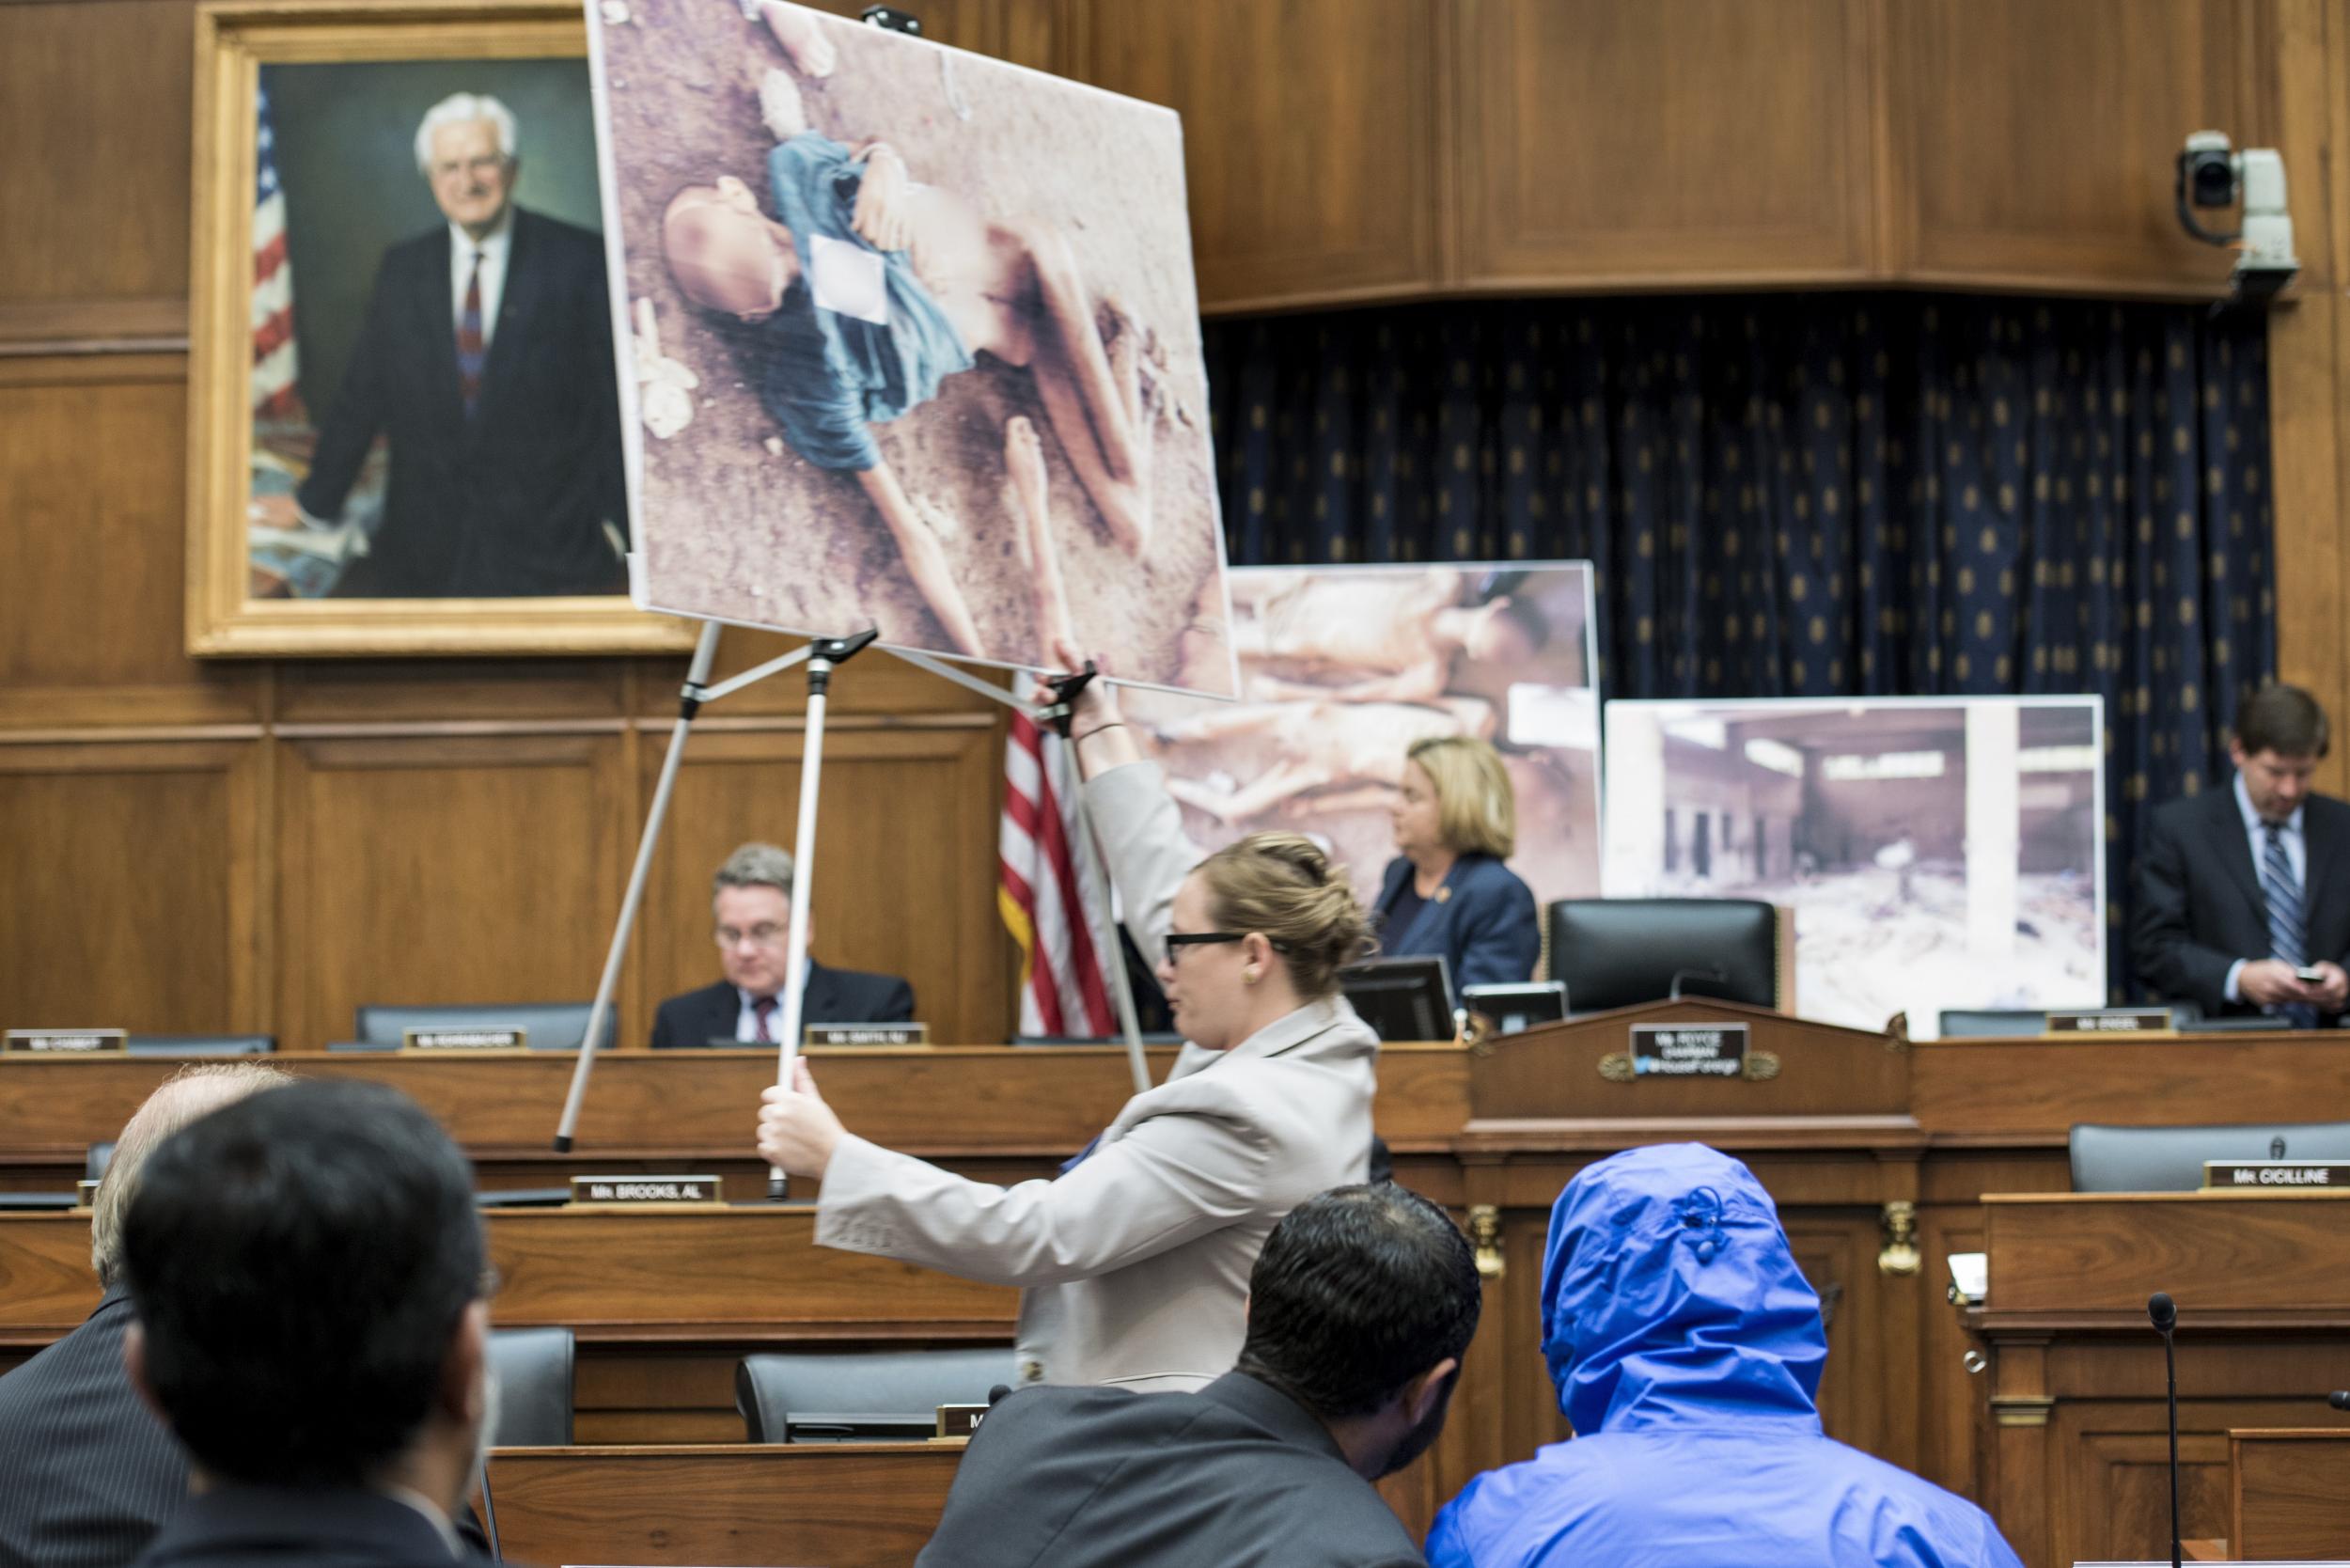 Syrian Army police photographer defector known as "Caesar" (C-blue jacket) waits to brief the House Foreign Affairs Committee on the torture and killing of anti-Assad regime activists on Capitol Hill in 2014